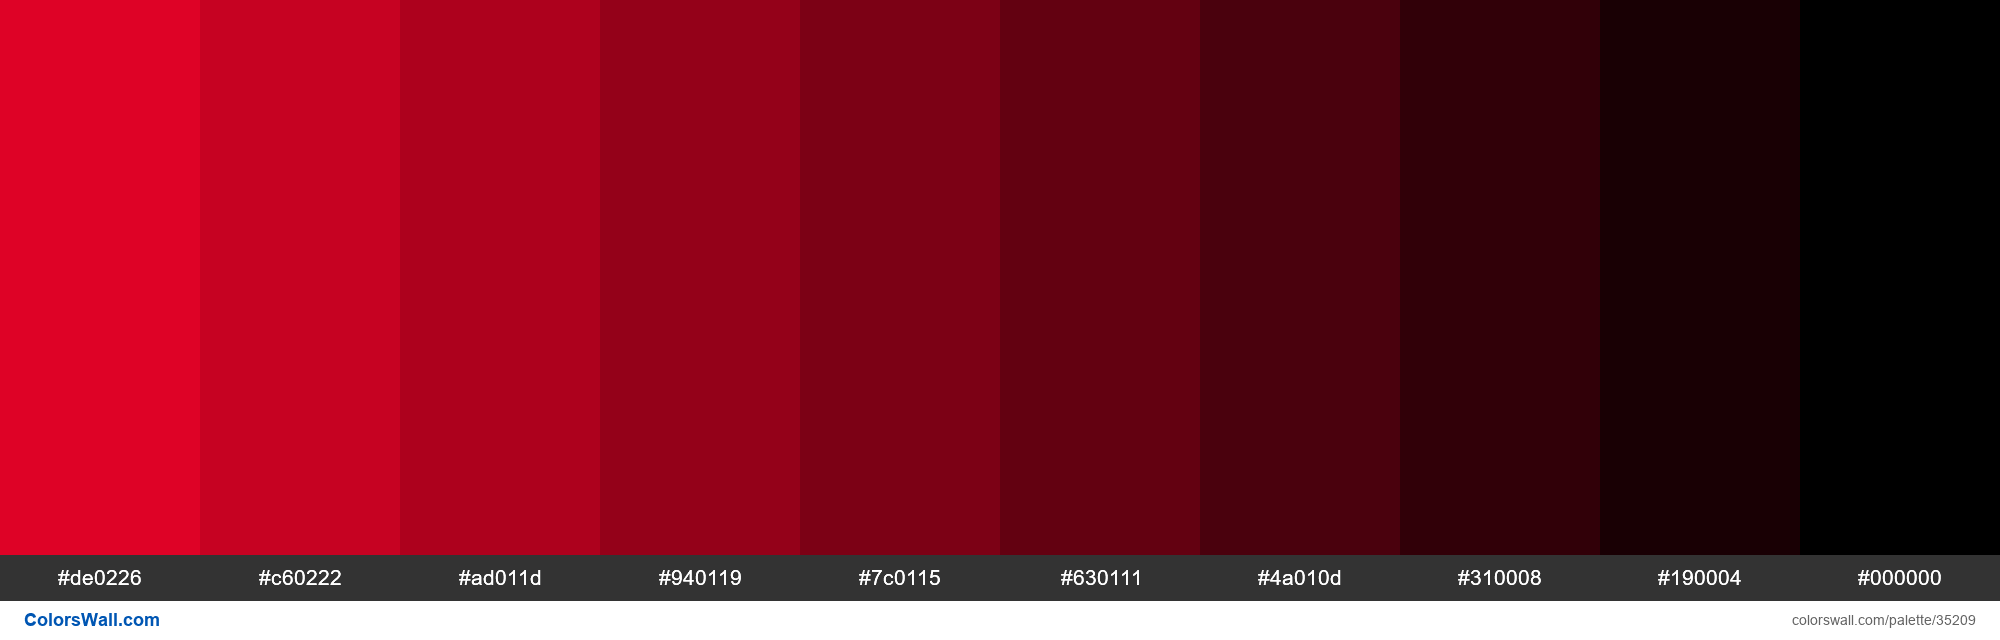 Shades Xkcd Color Cherry Red F7022a Hex 35209 Colorswall 